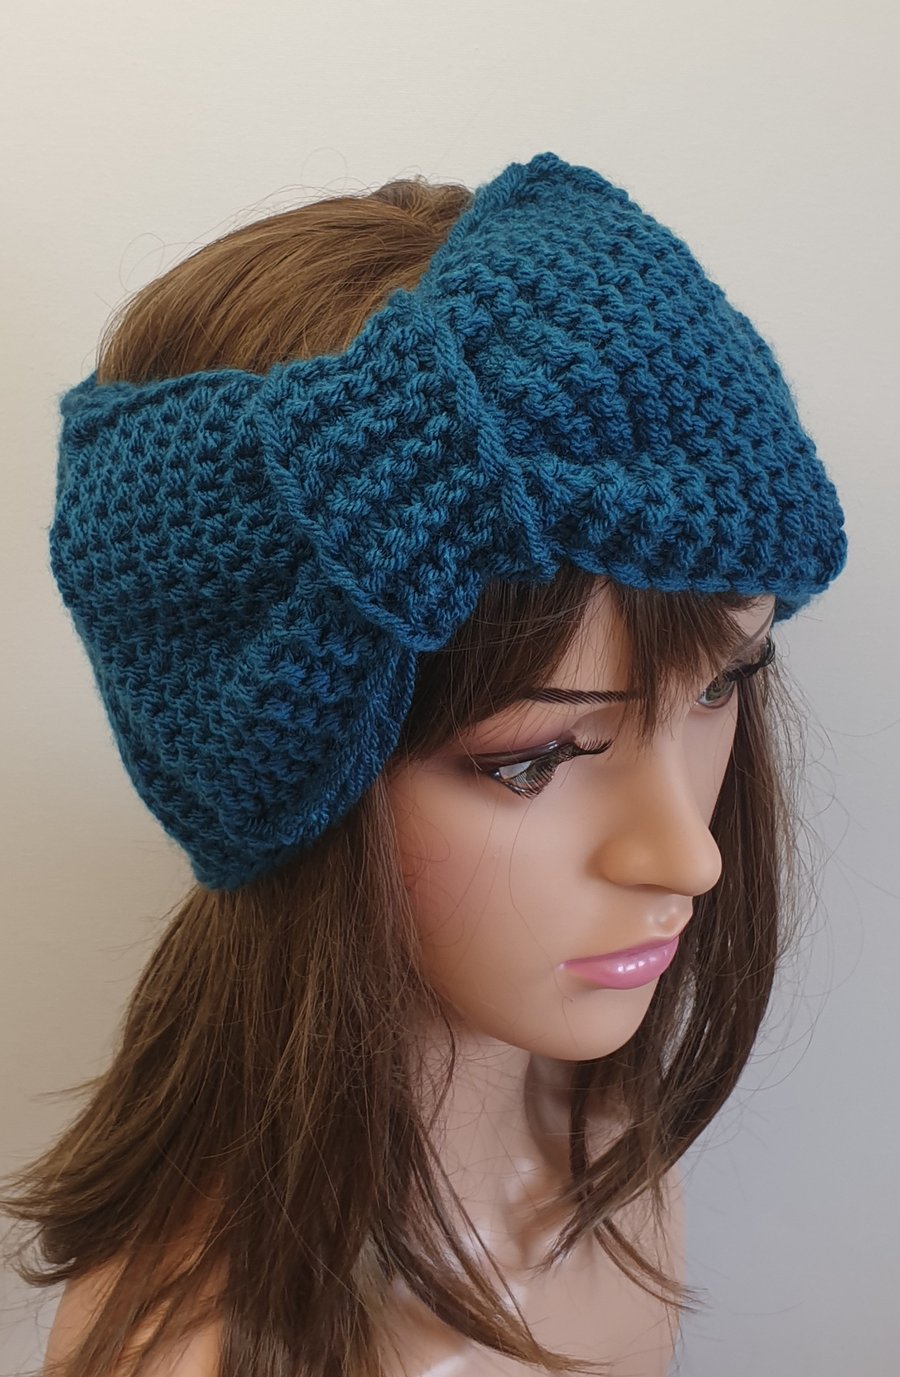 Hand knitted headband with large bow